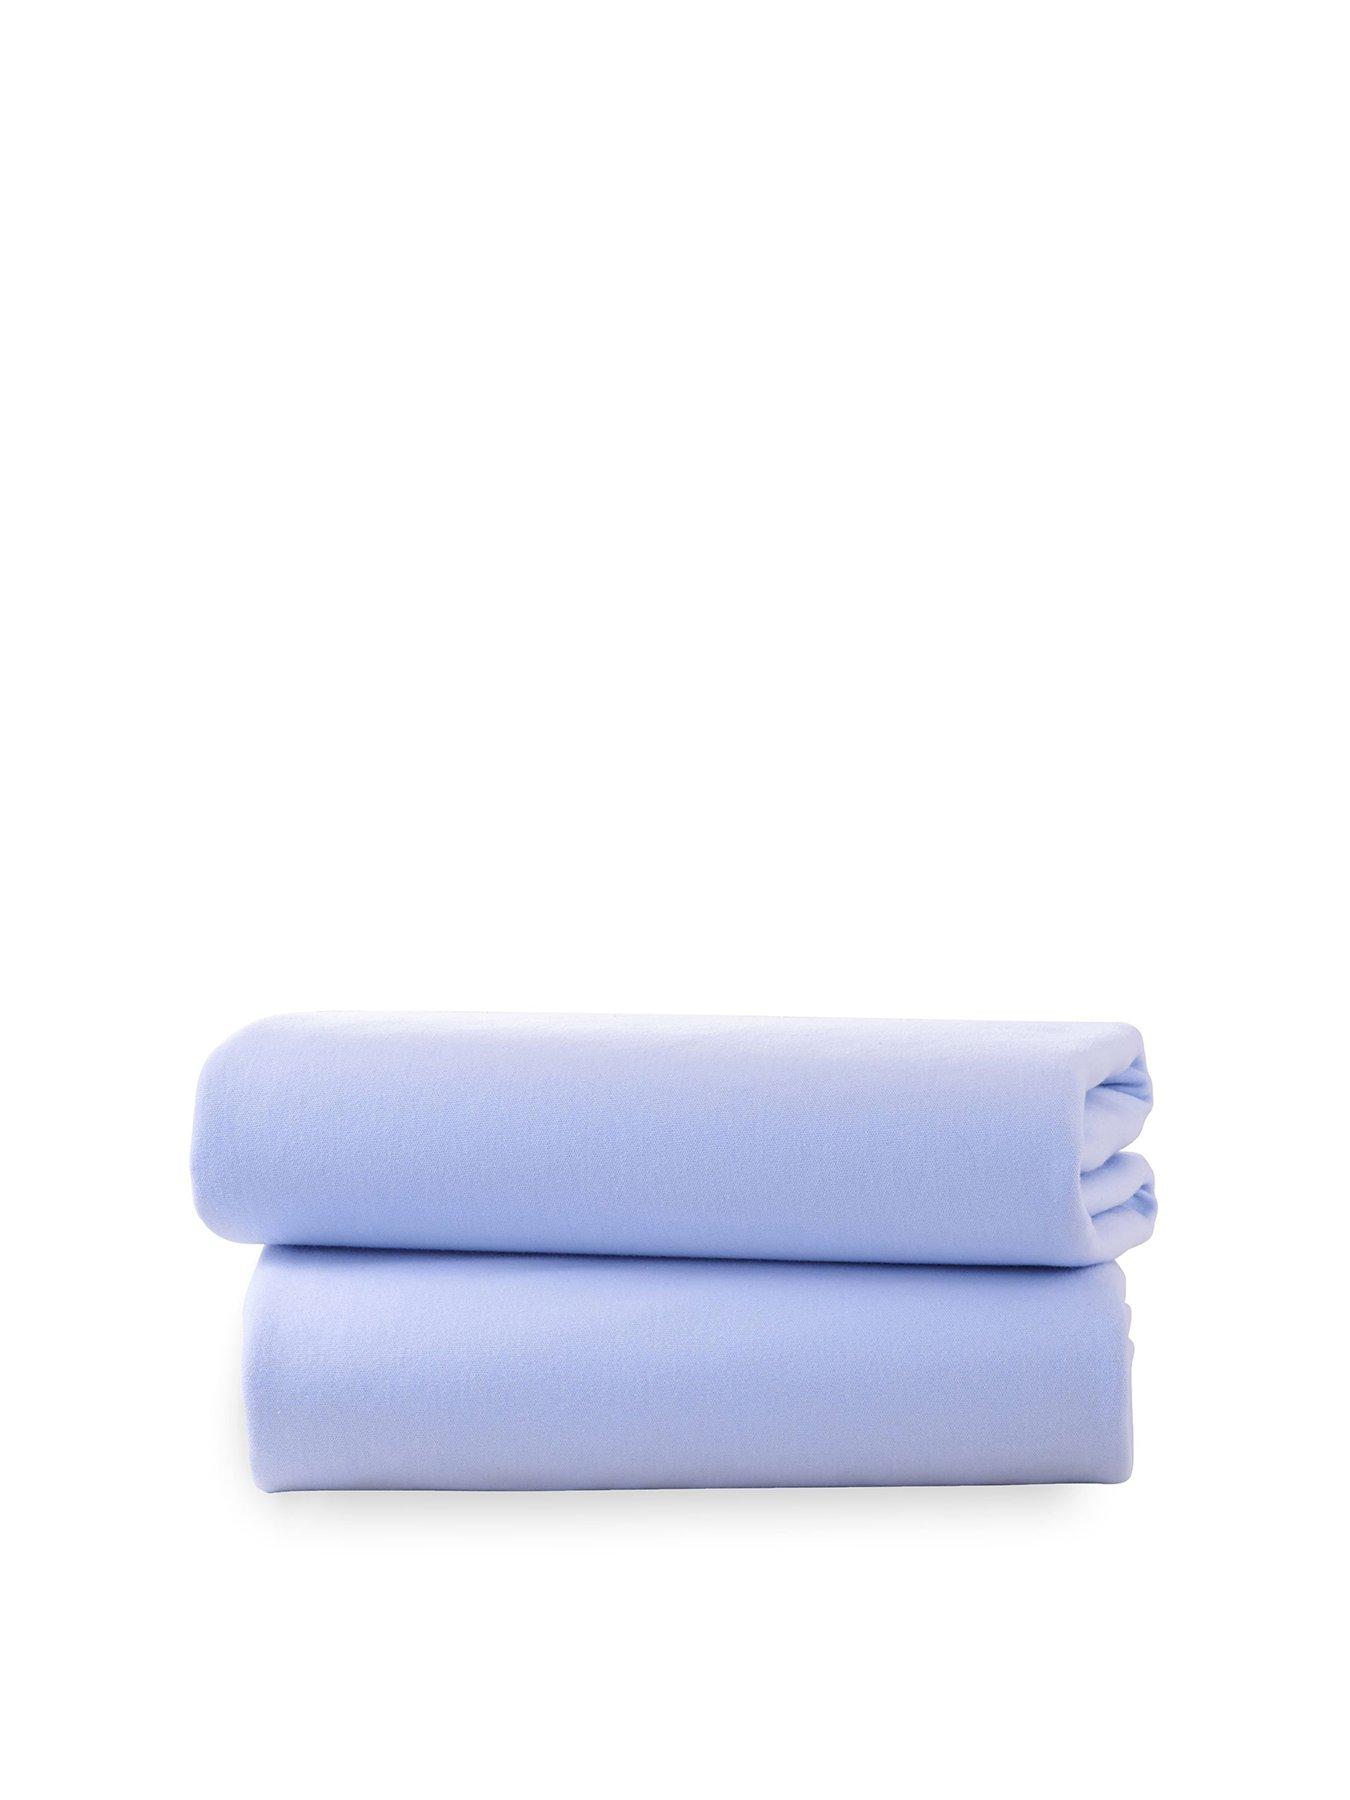 2x Crib Jersey Cradle Fitted Sheet 100% Cotton 40 x 90cm Blue 